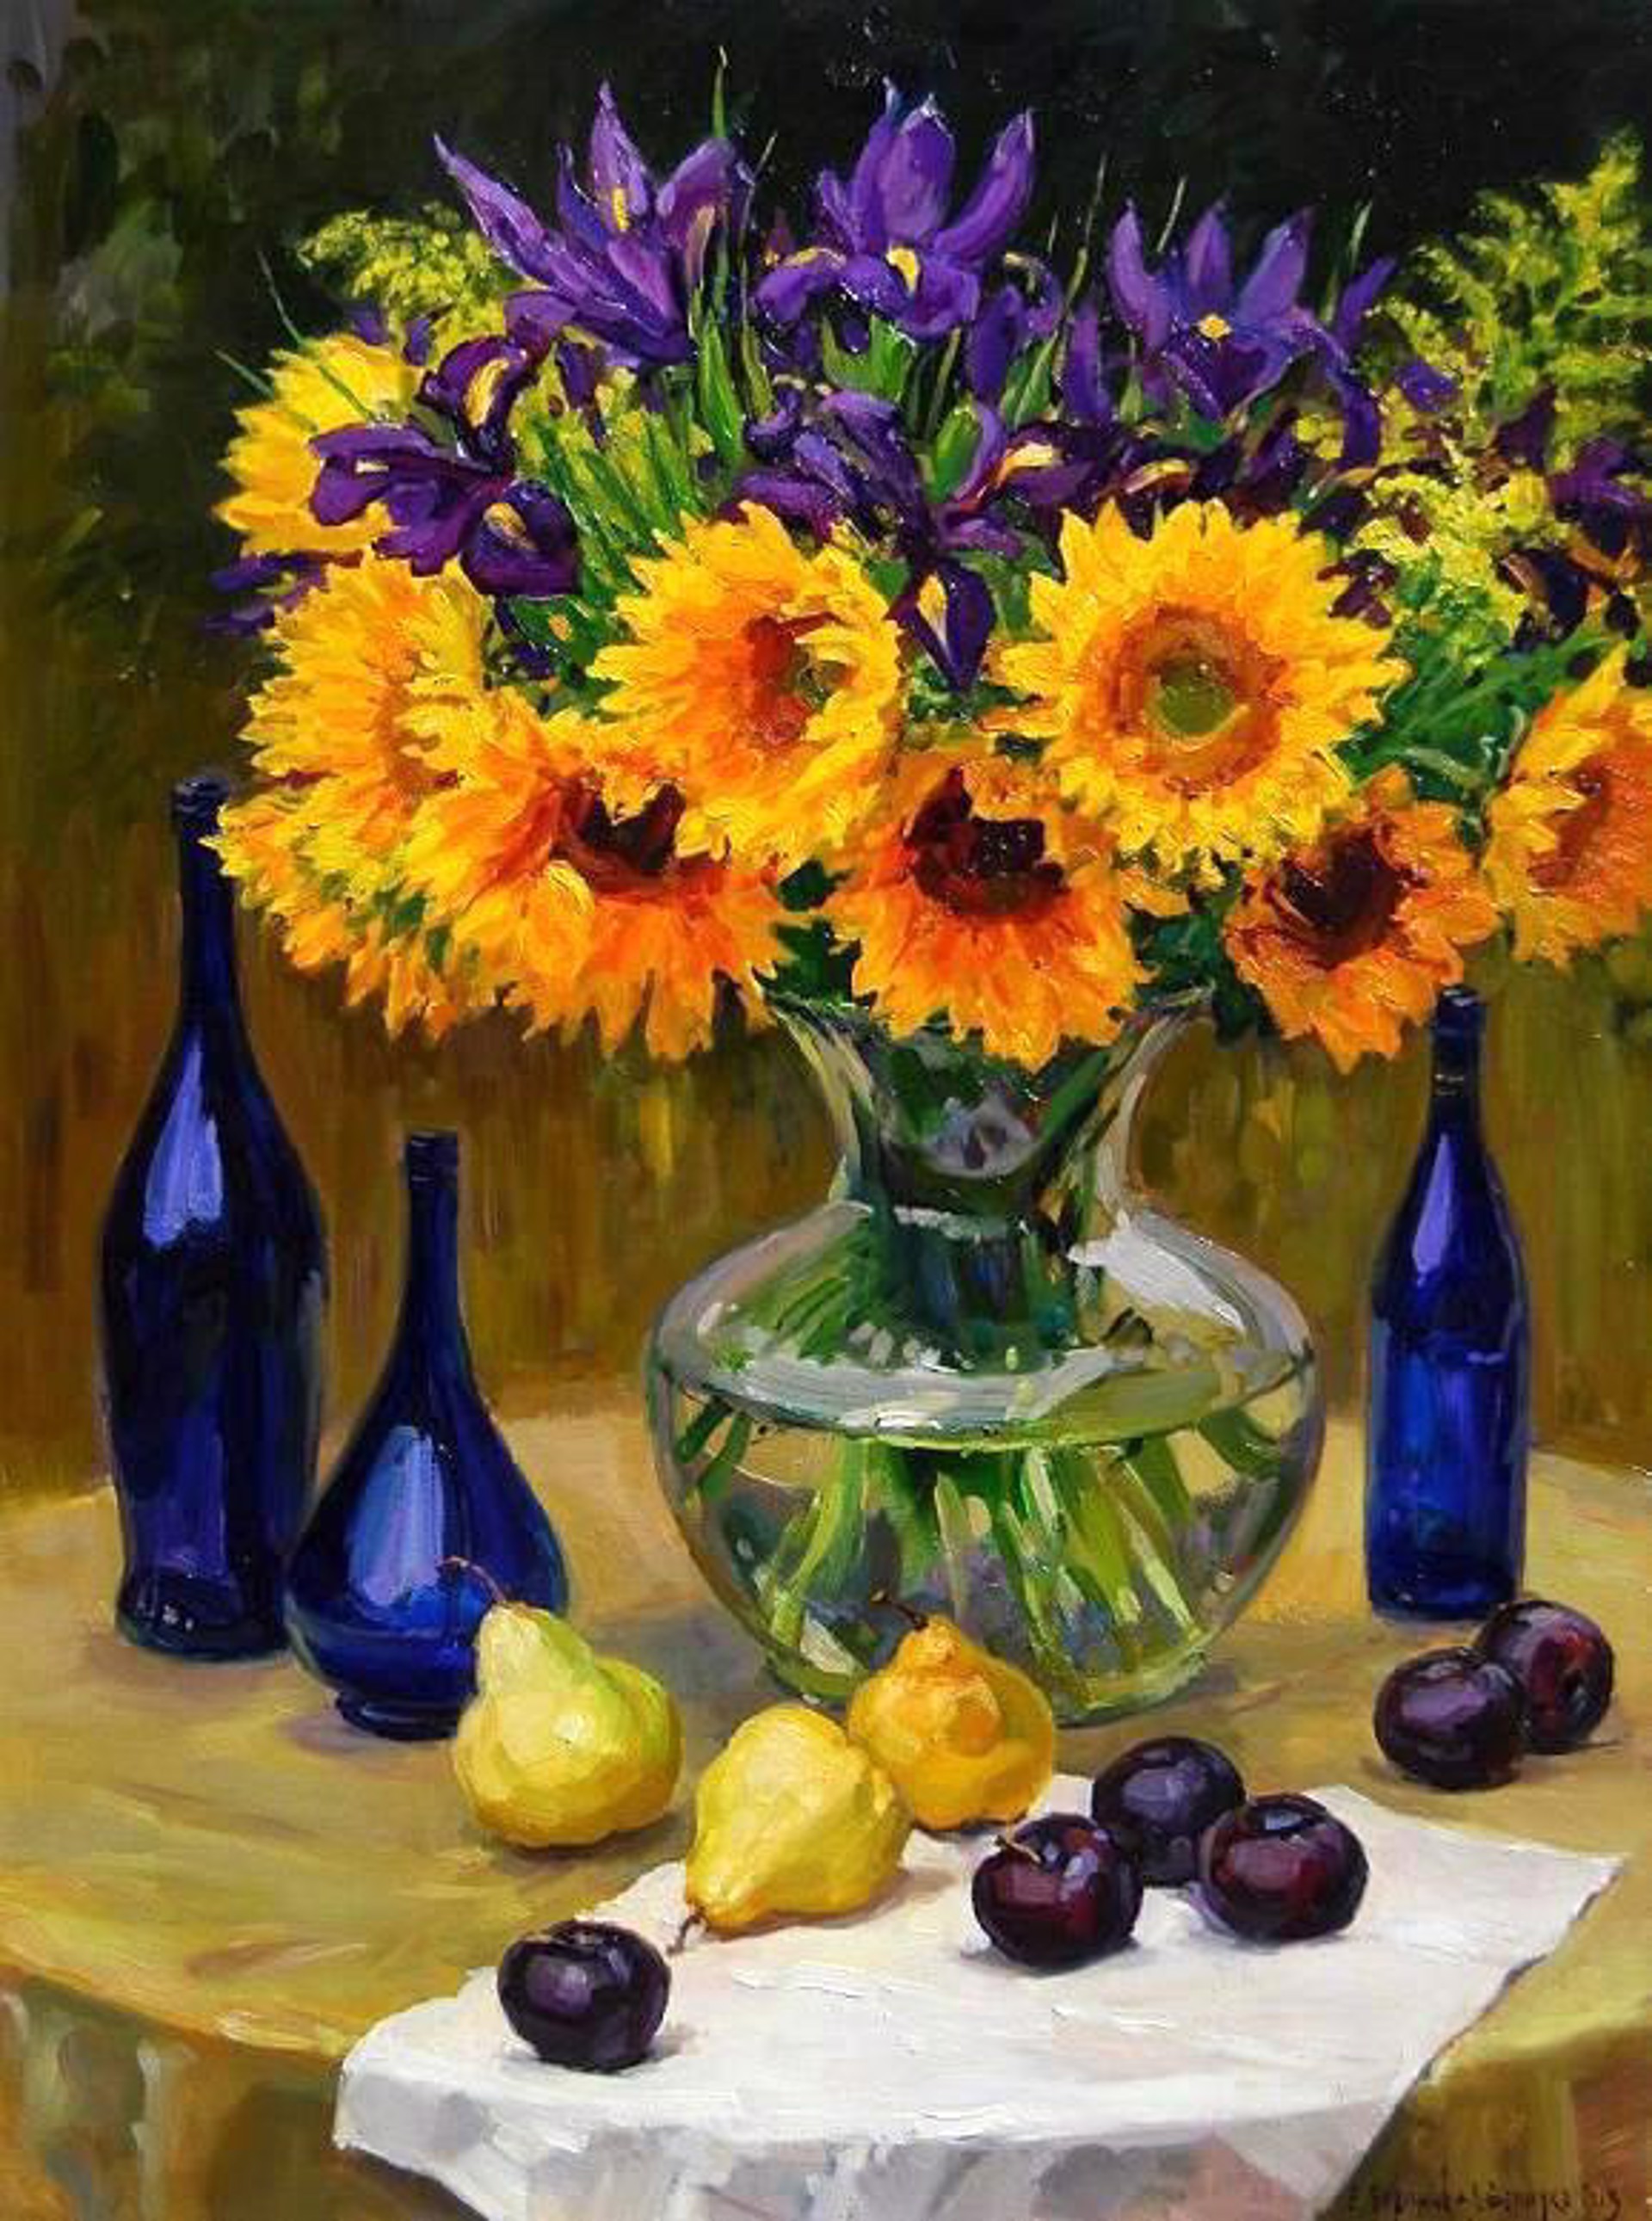 Arrangement in Blues and Yellows by Evgeny & Lydia Baranov